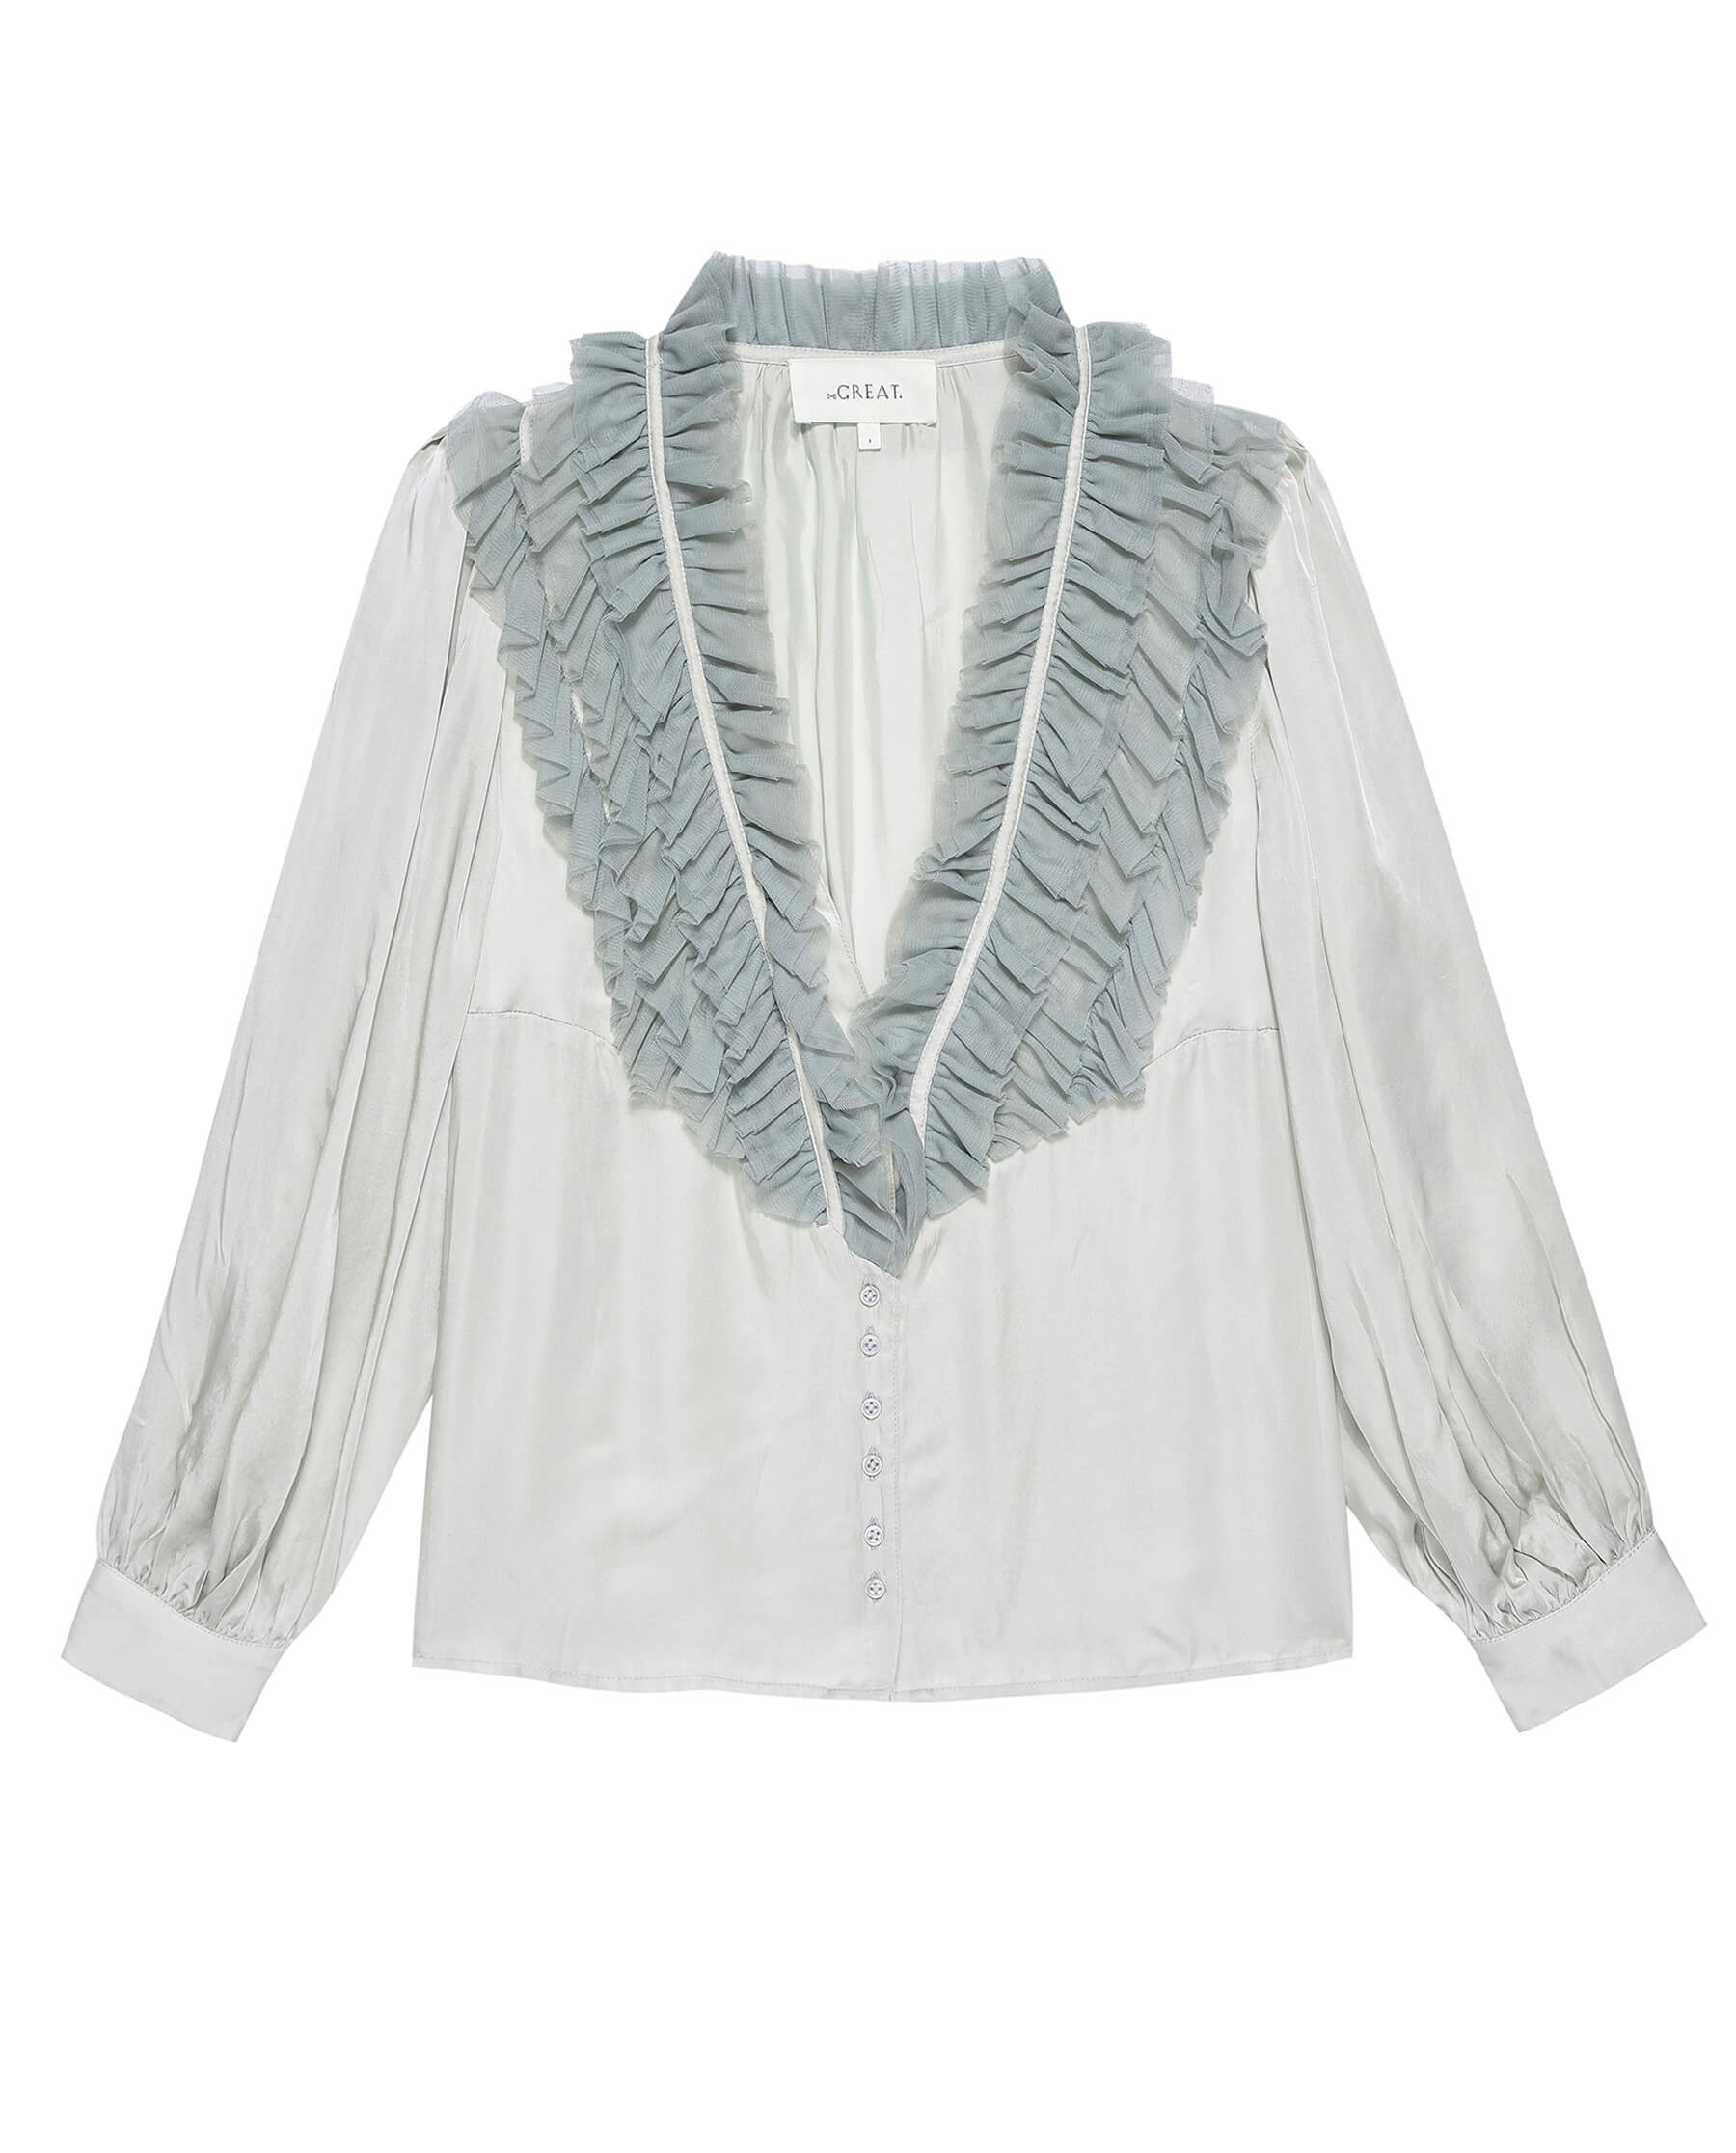 The Ruffled Tuxedo Top. -- Silver with Icy Blue SHIRTS THE GREAT. HOL 23 VISCOSE MESH SALE